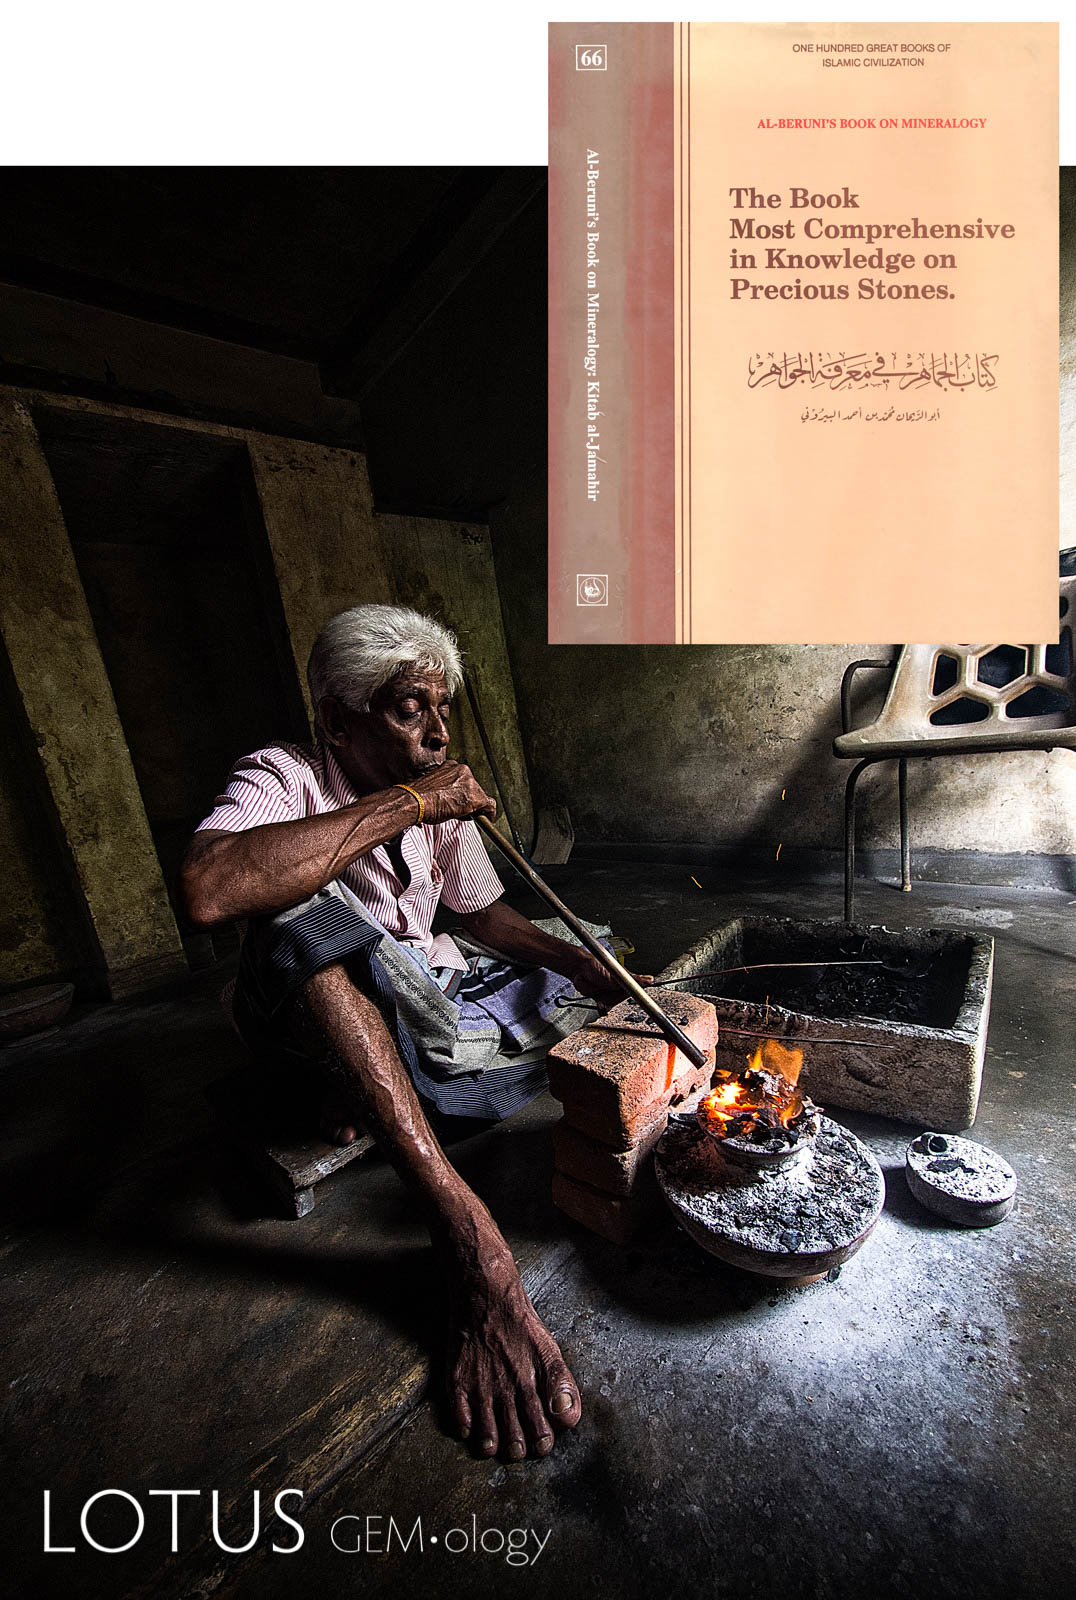 Blowpipe heating of ruby to remove bluish overtones was accurately described by al Beruni (inset) over a thousand years ago. Photo: E. Billie Hughes in Ratnapura, Sri Lanka, 2015. Click on the photo for a larger image.